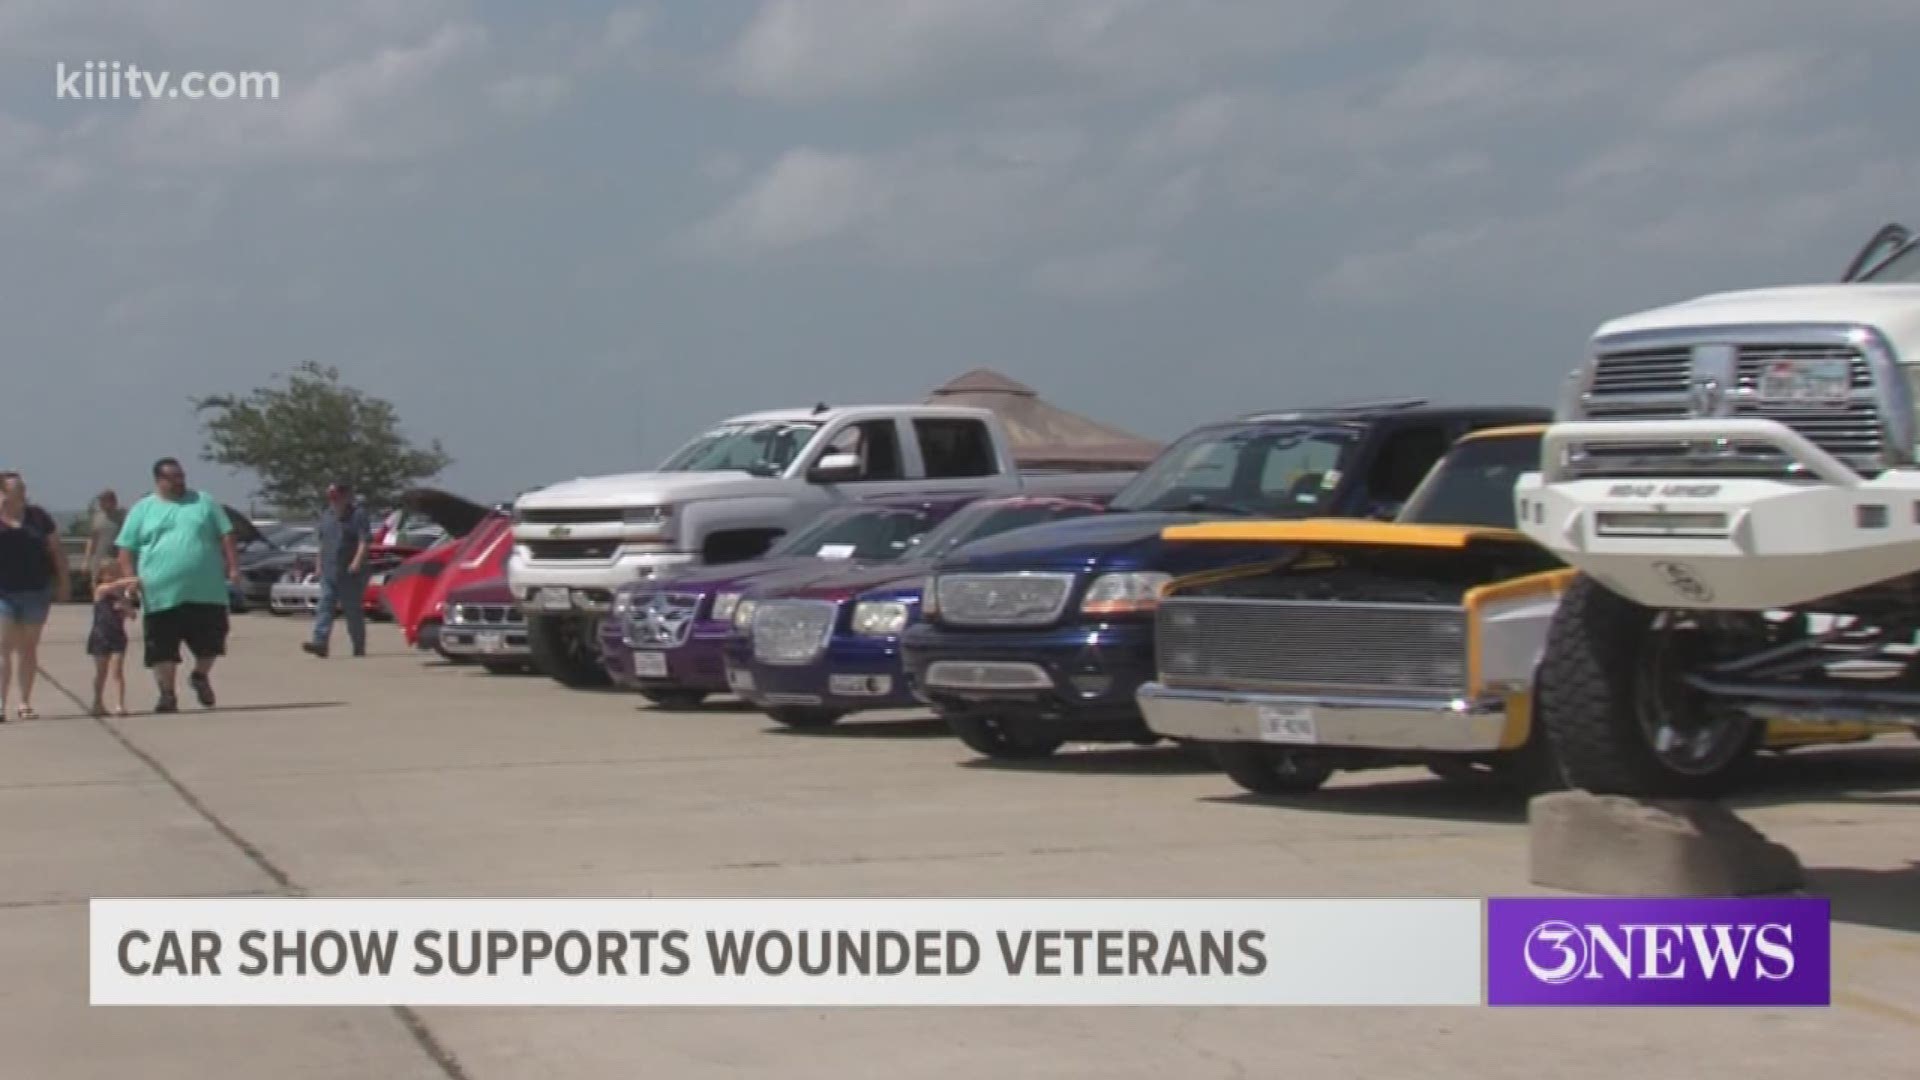 Church of Hope donated funds to their children's ministry and an organization that helps wounded veterans.